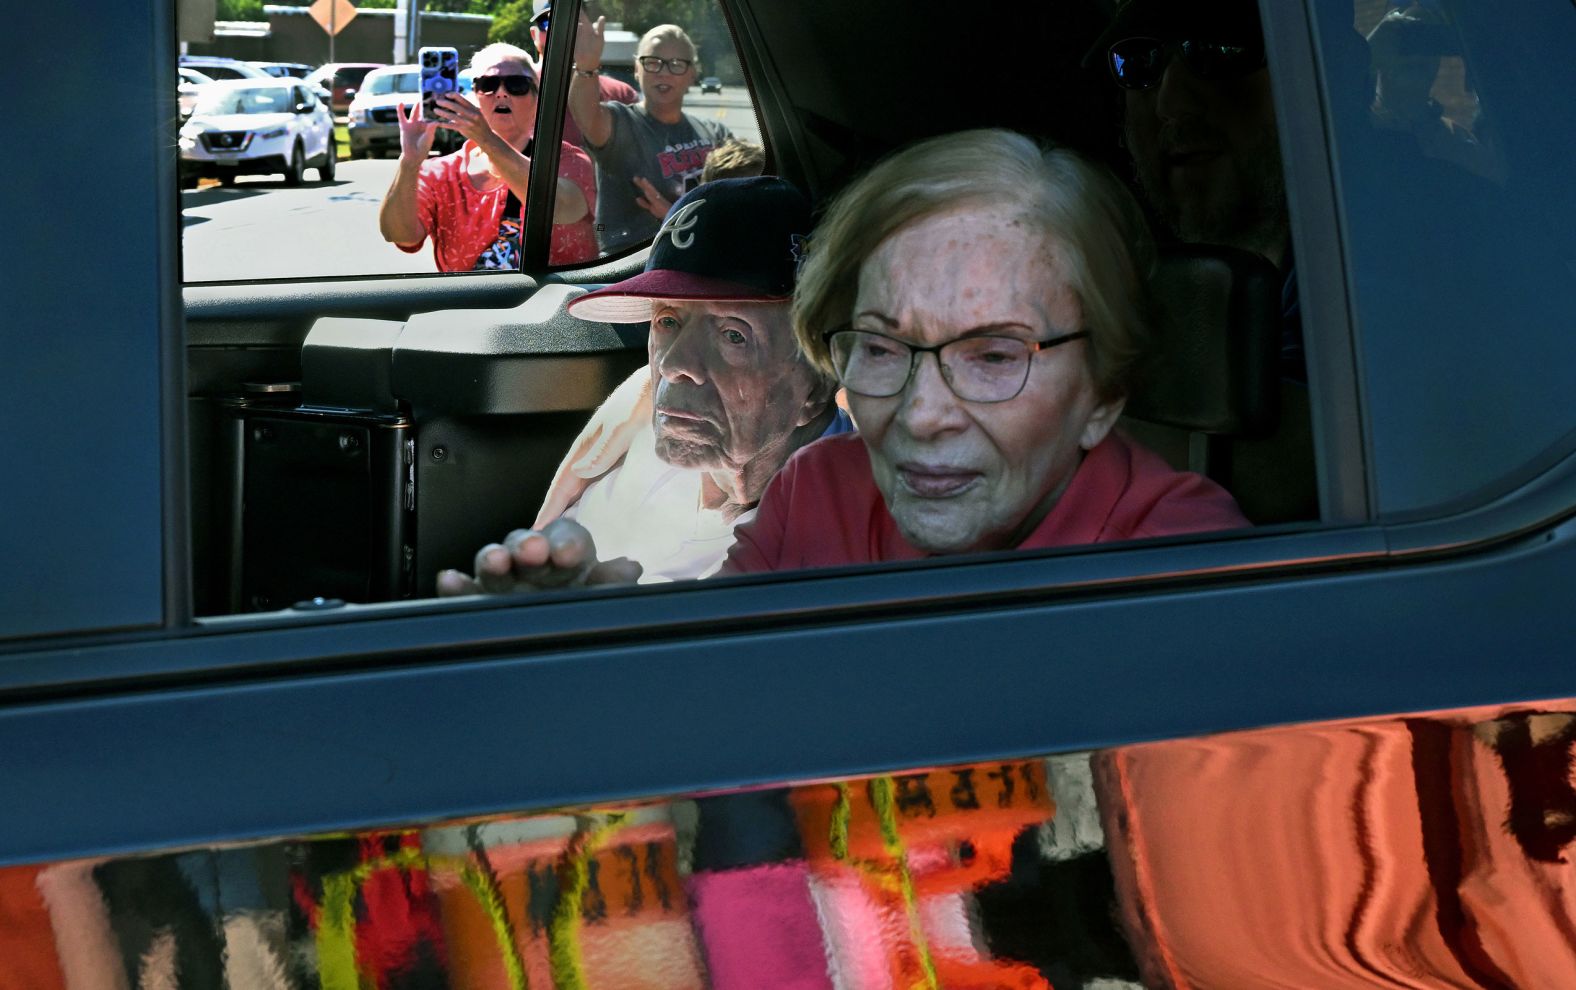 The Carters <a href="https://www.cnn.com/2023/09/23/politics/jimmy-rosalynn-carter-georgia-festival/index.html" target="_blank">appear at the Peanut Festival Parade</a> in Plains, Georgia, in September 2023. It was the first time the former president had been seen in public since he began receiving hospice care at home in February.